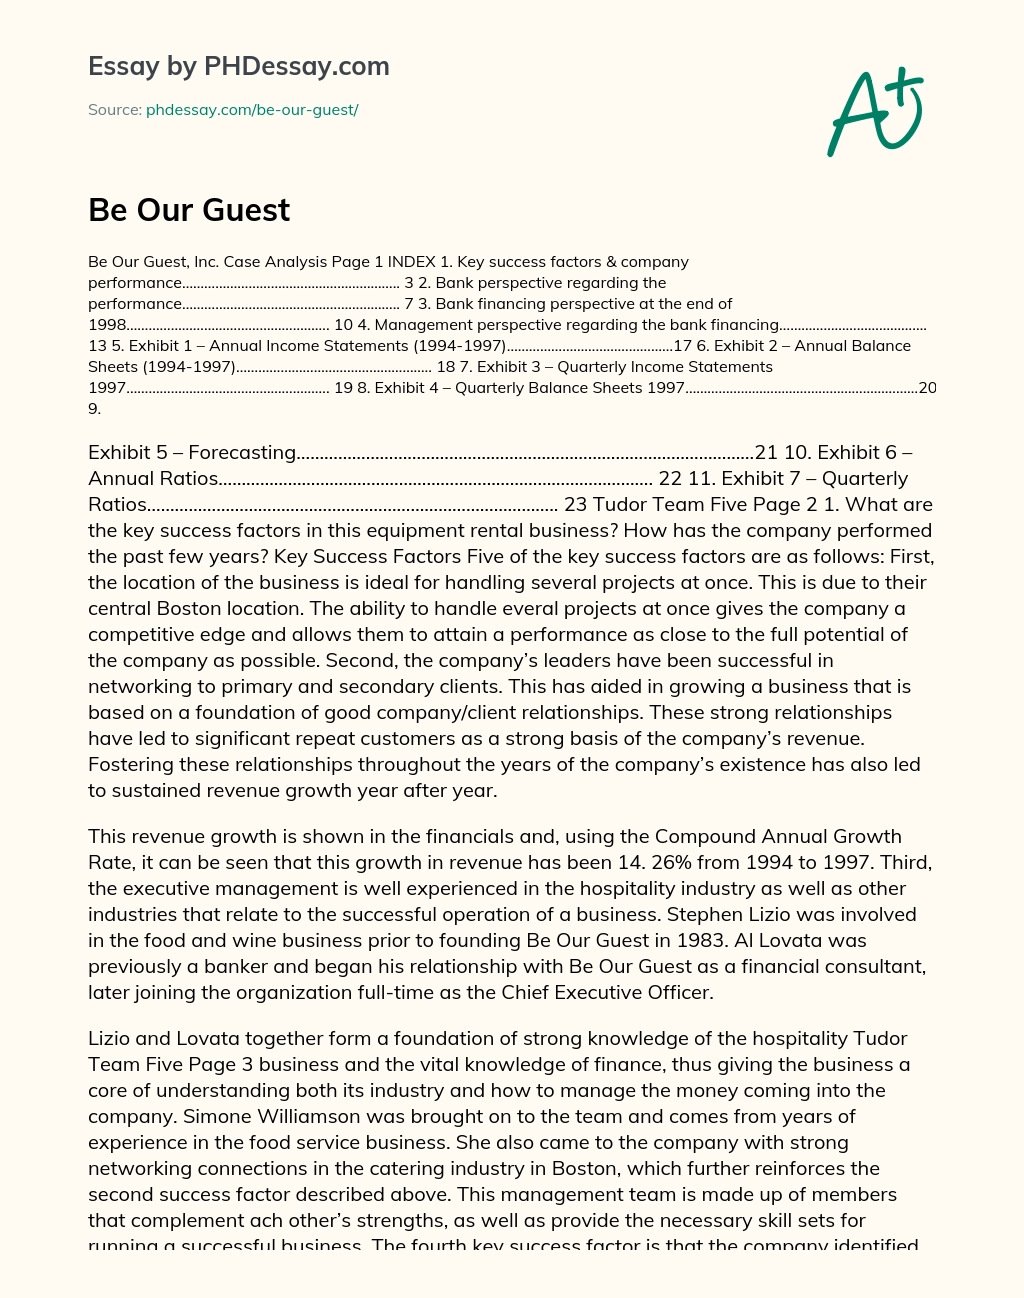 Analysis of Be Our Guest, Inc.: Key Success Factors and Company Performance essay